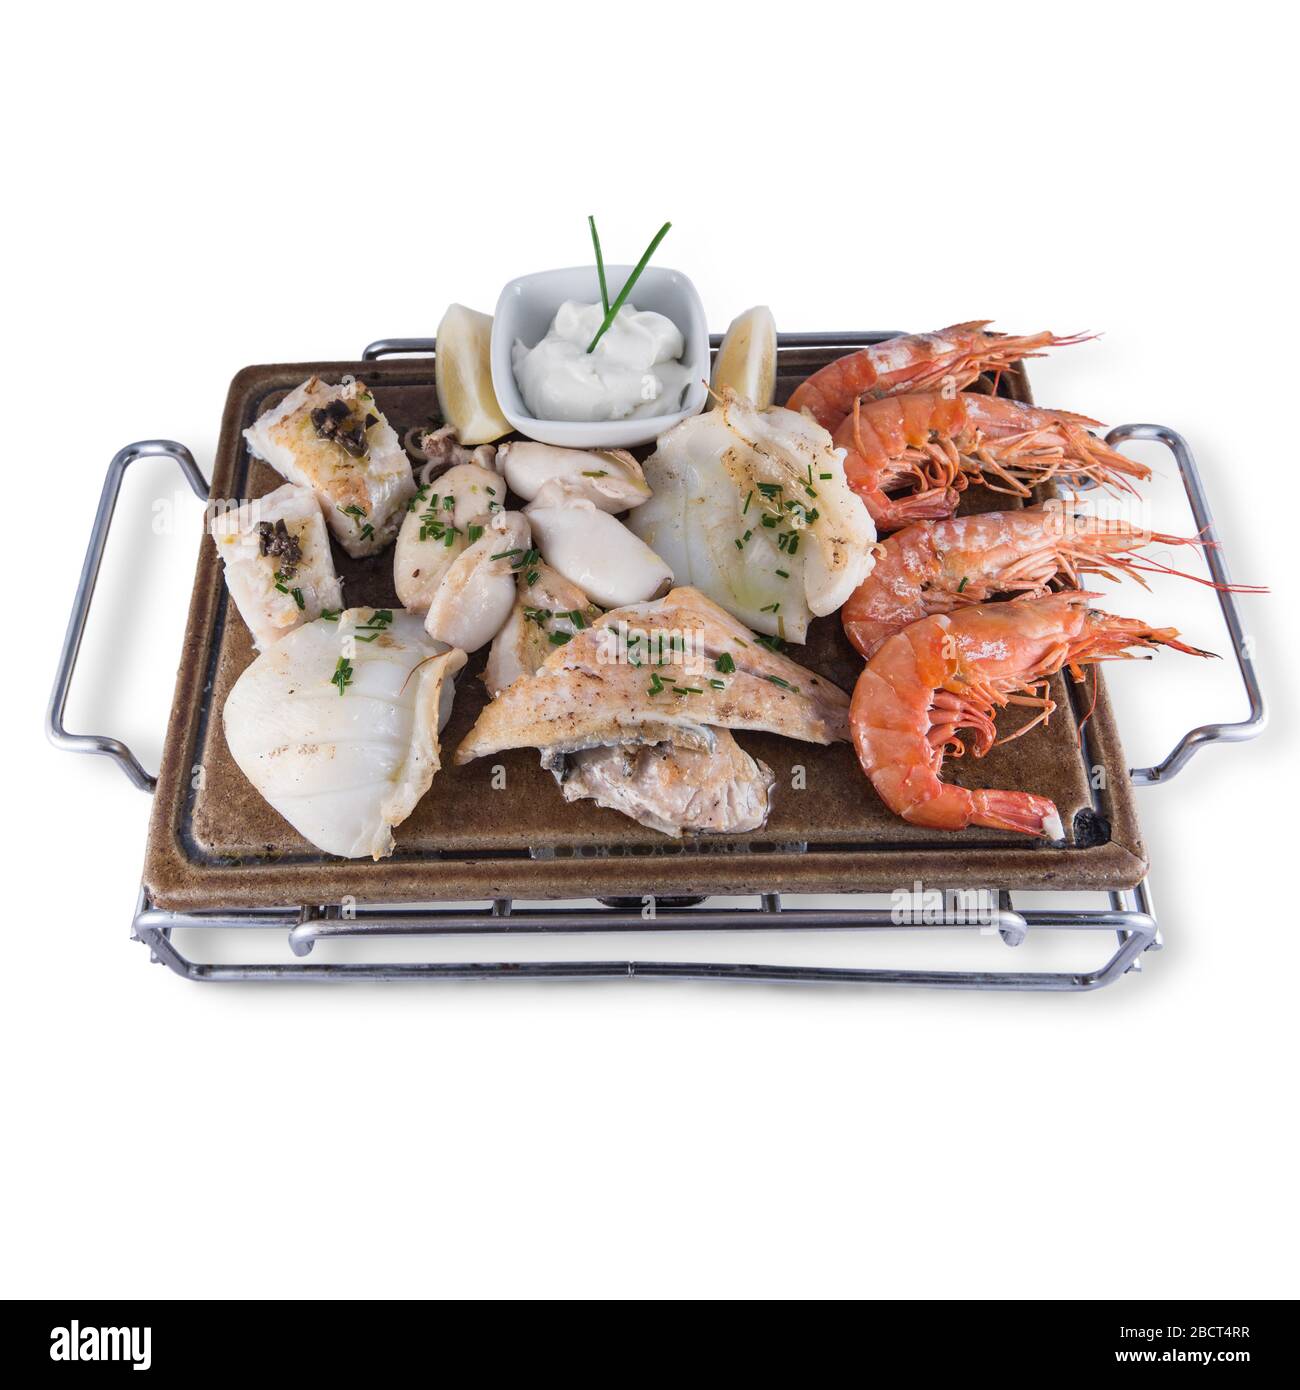 Grilled fish dish with cuttlefish, prawns, hake, sole and squid. Stock Photo